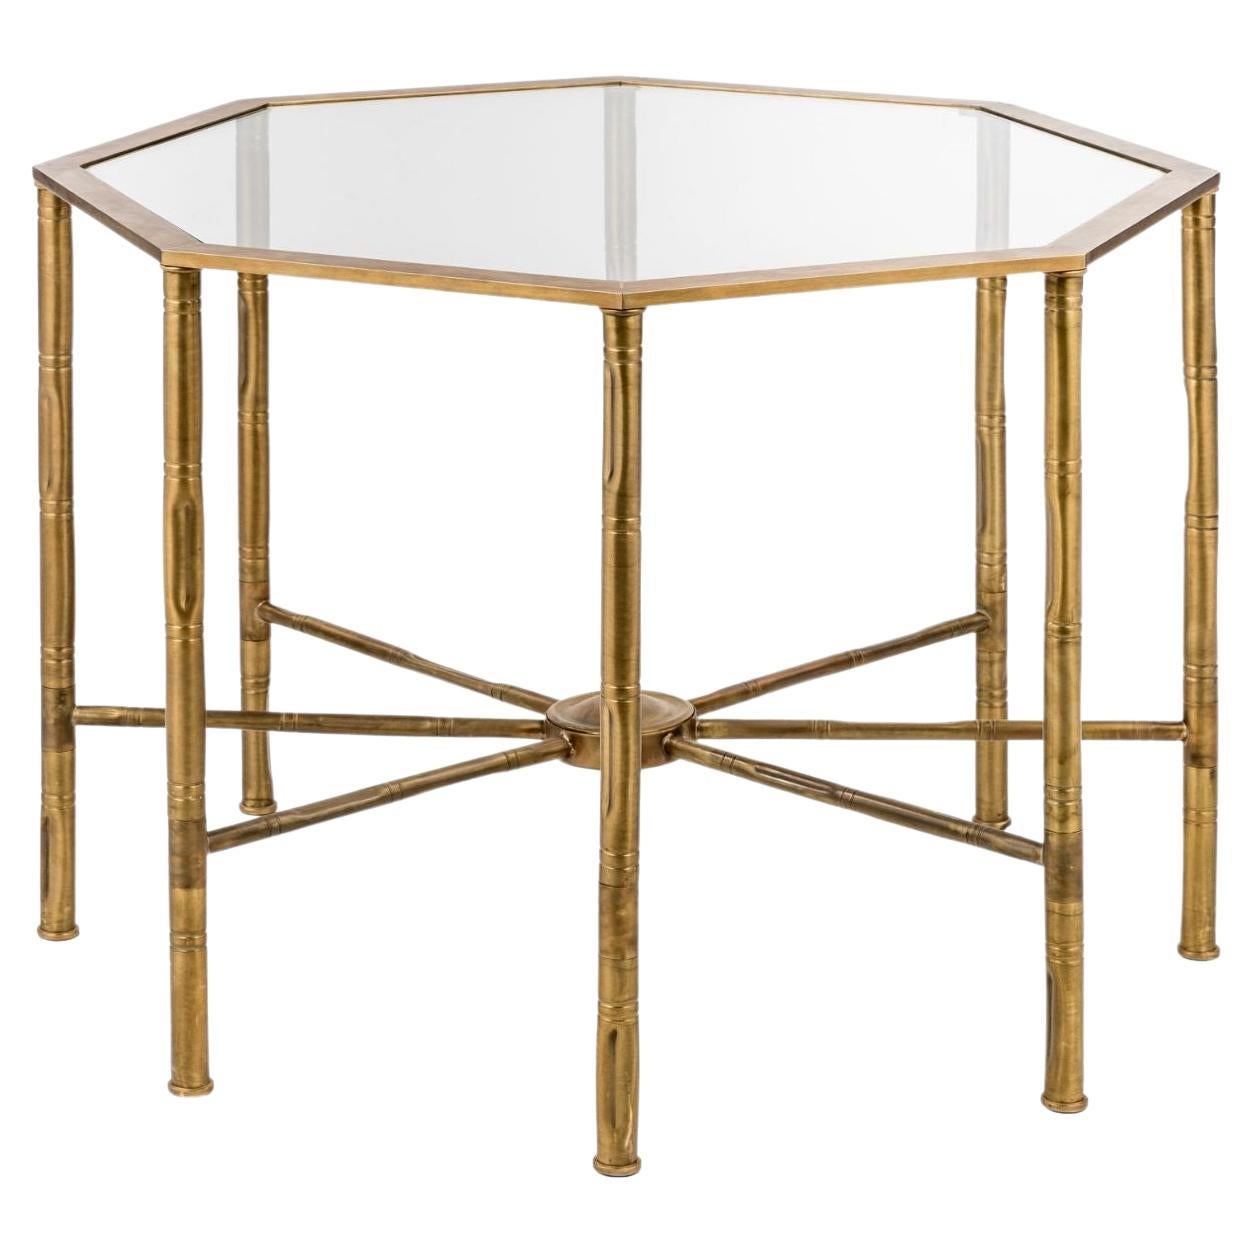 Bamboo Octagonal Side Table with Glass Top, Natural Finish For Sale